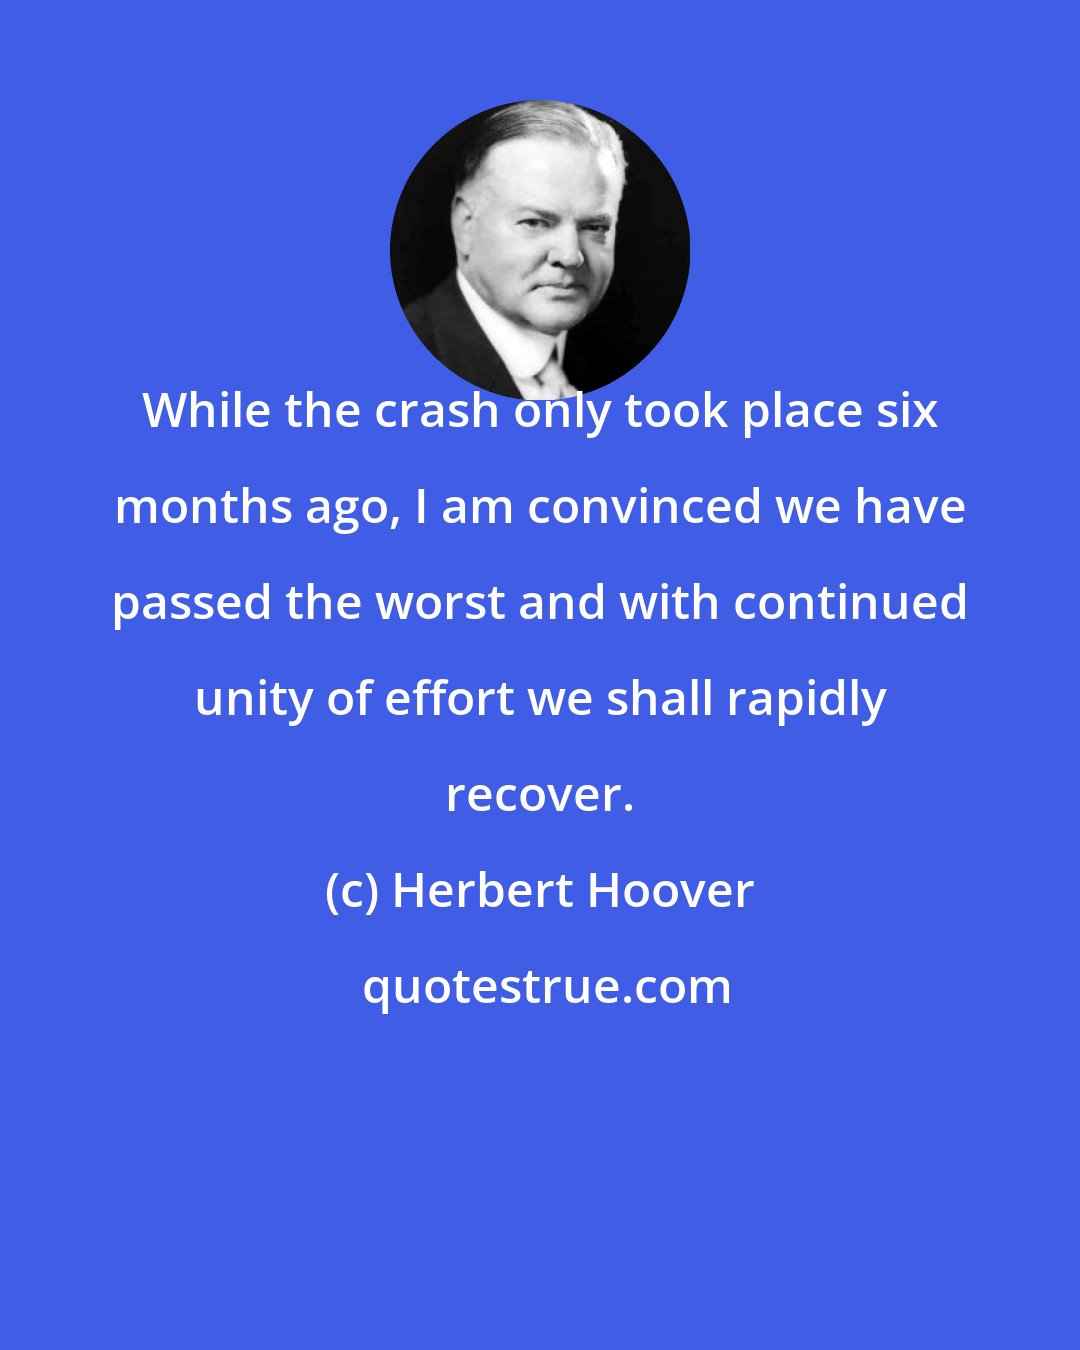 Herbert Hoover: While the crash only took place six months ago, I am convinced we have passed the worst and with continued unity of effort we shall rapidly recover.